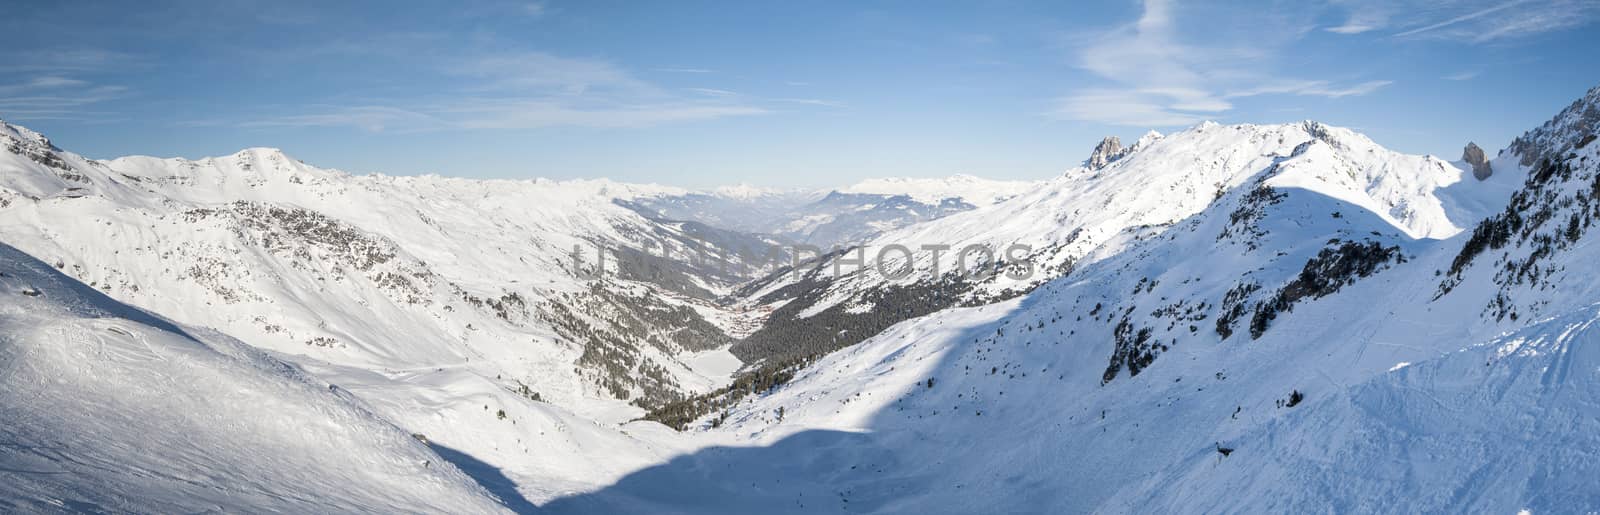 Panoramic view of a snow covered mountain range in the alps looking down valley